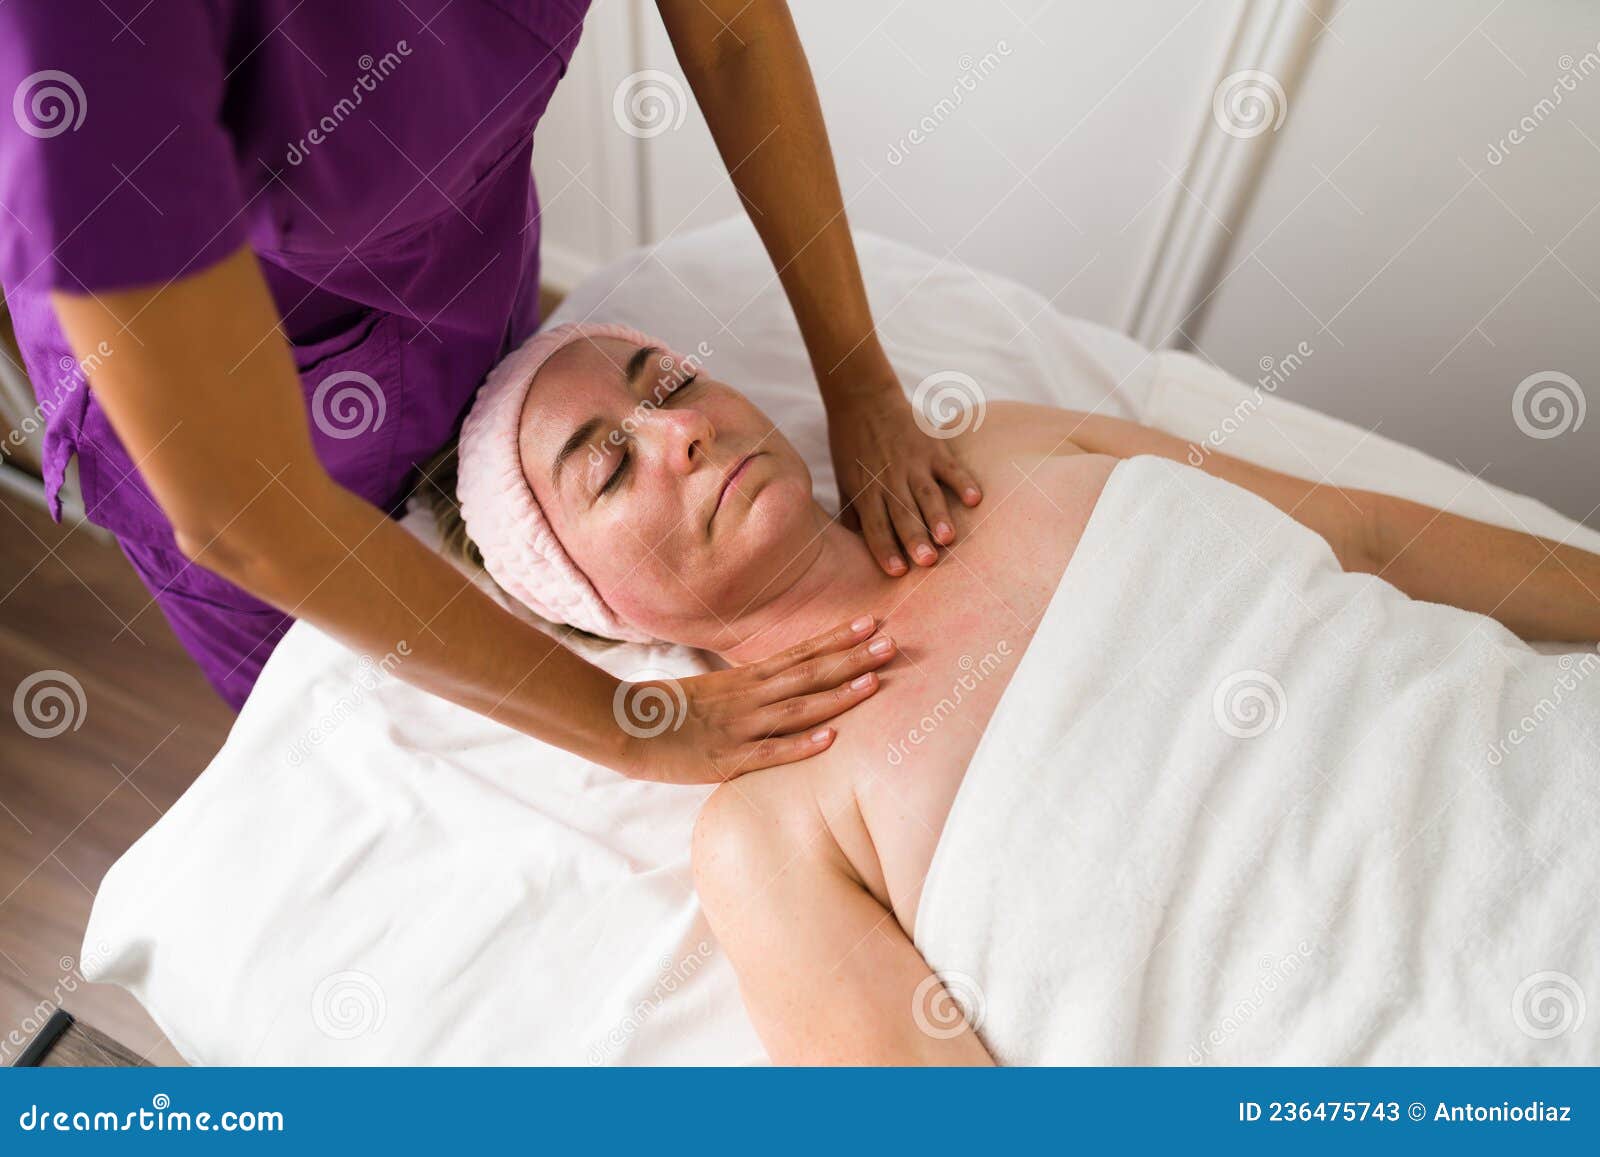 låg grim vil gøre Top View of an Older Woman Getting a Massage Stock Image - Image of calm,  view: 236475743